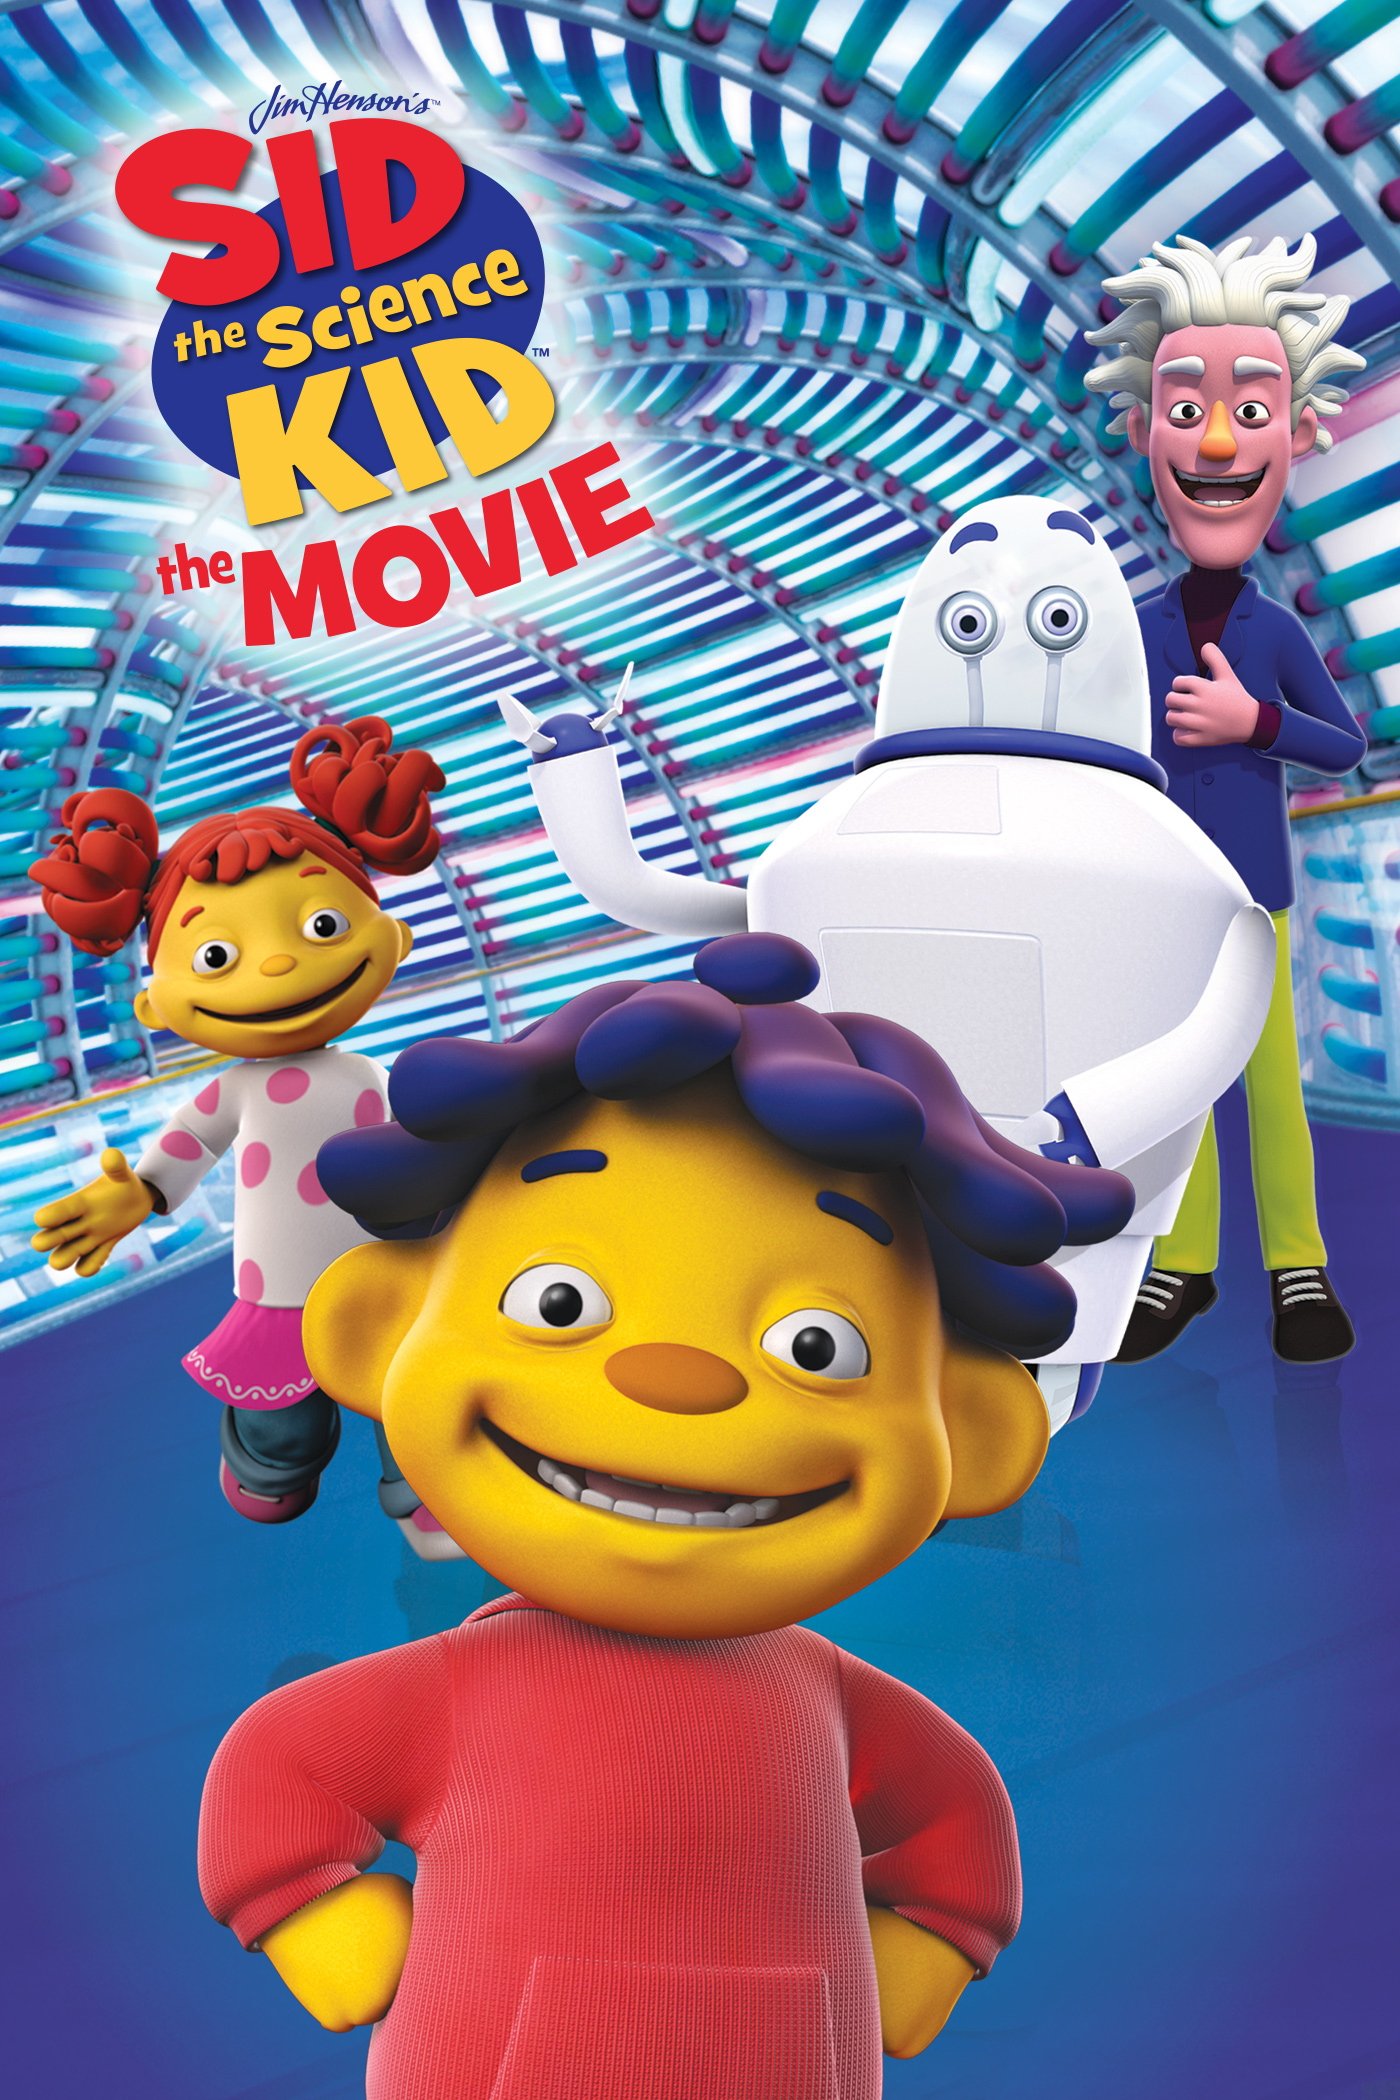 L'affiche du film Sid the Science Kid: The Movie